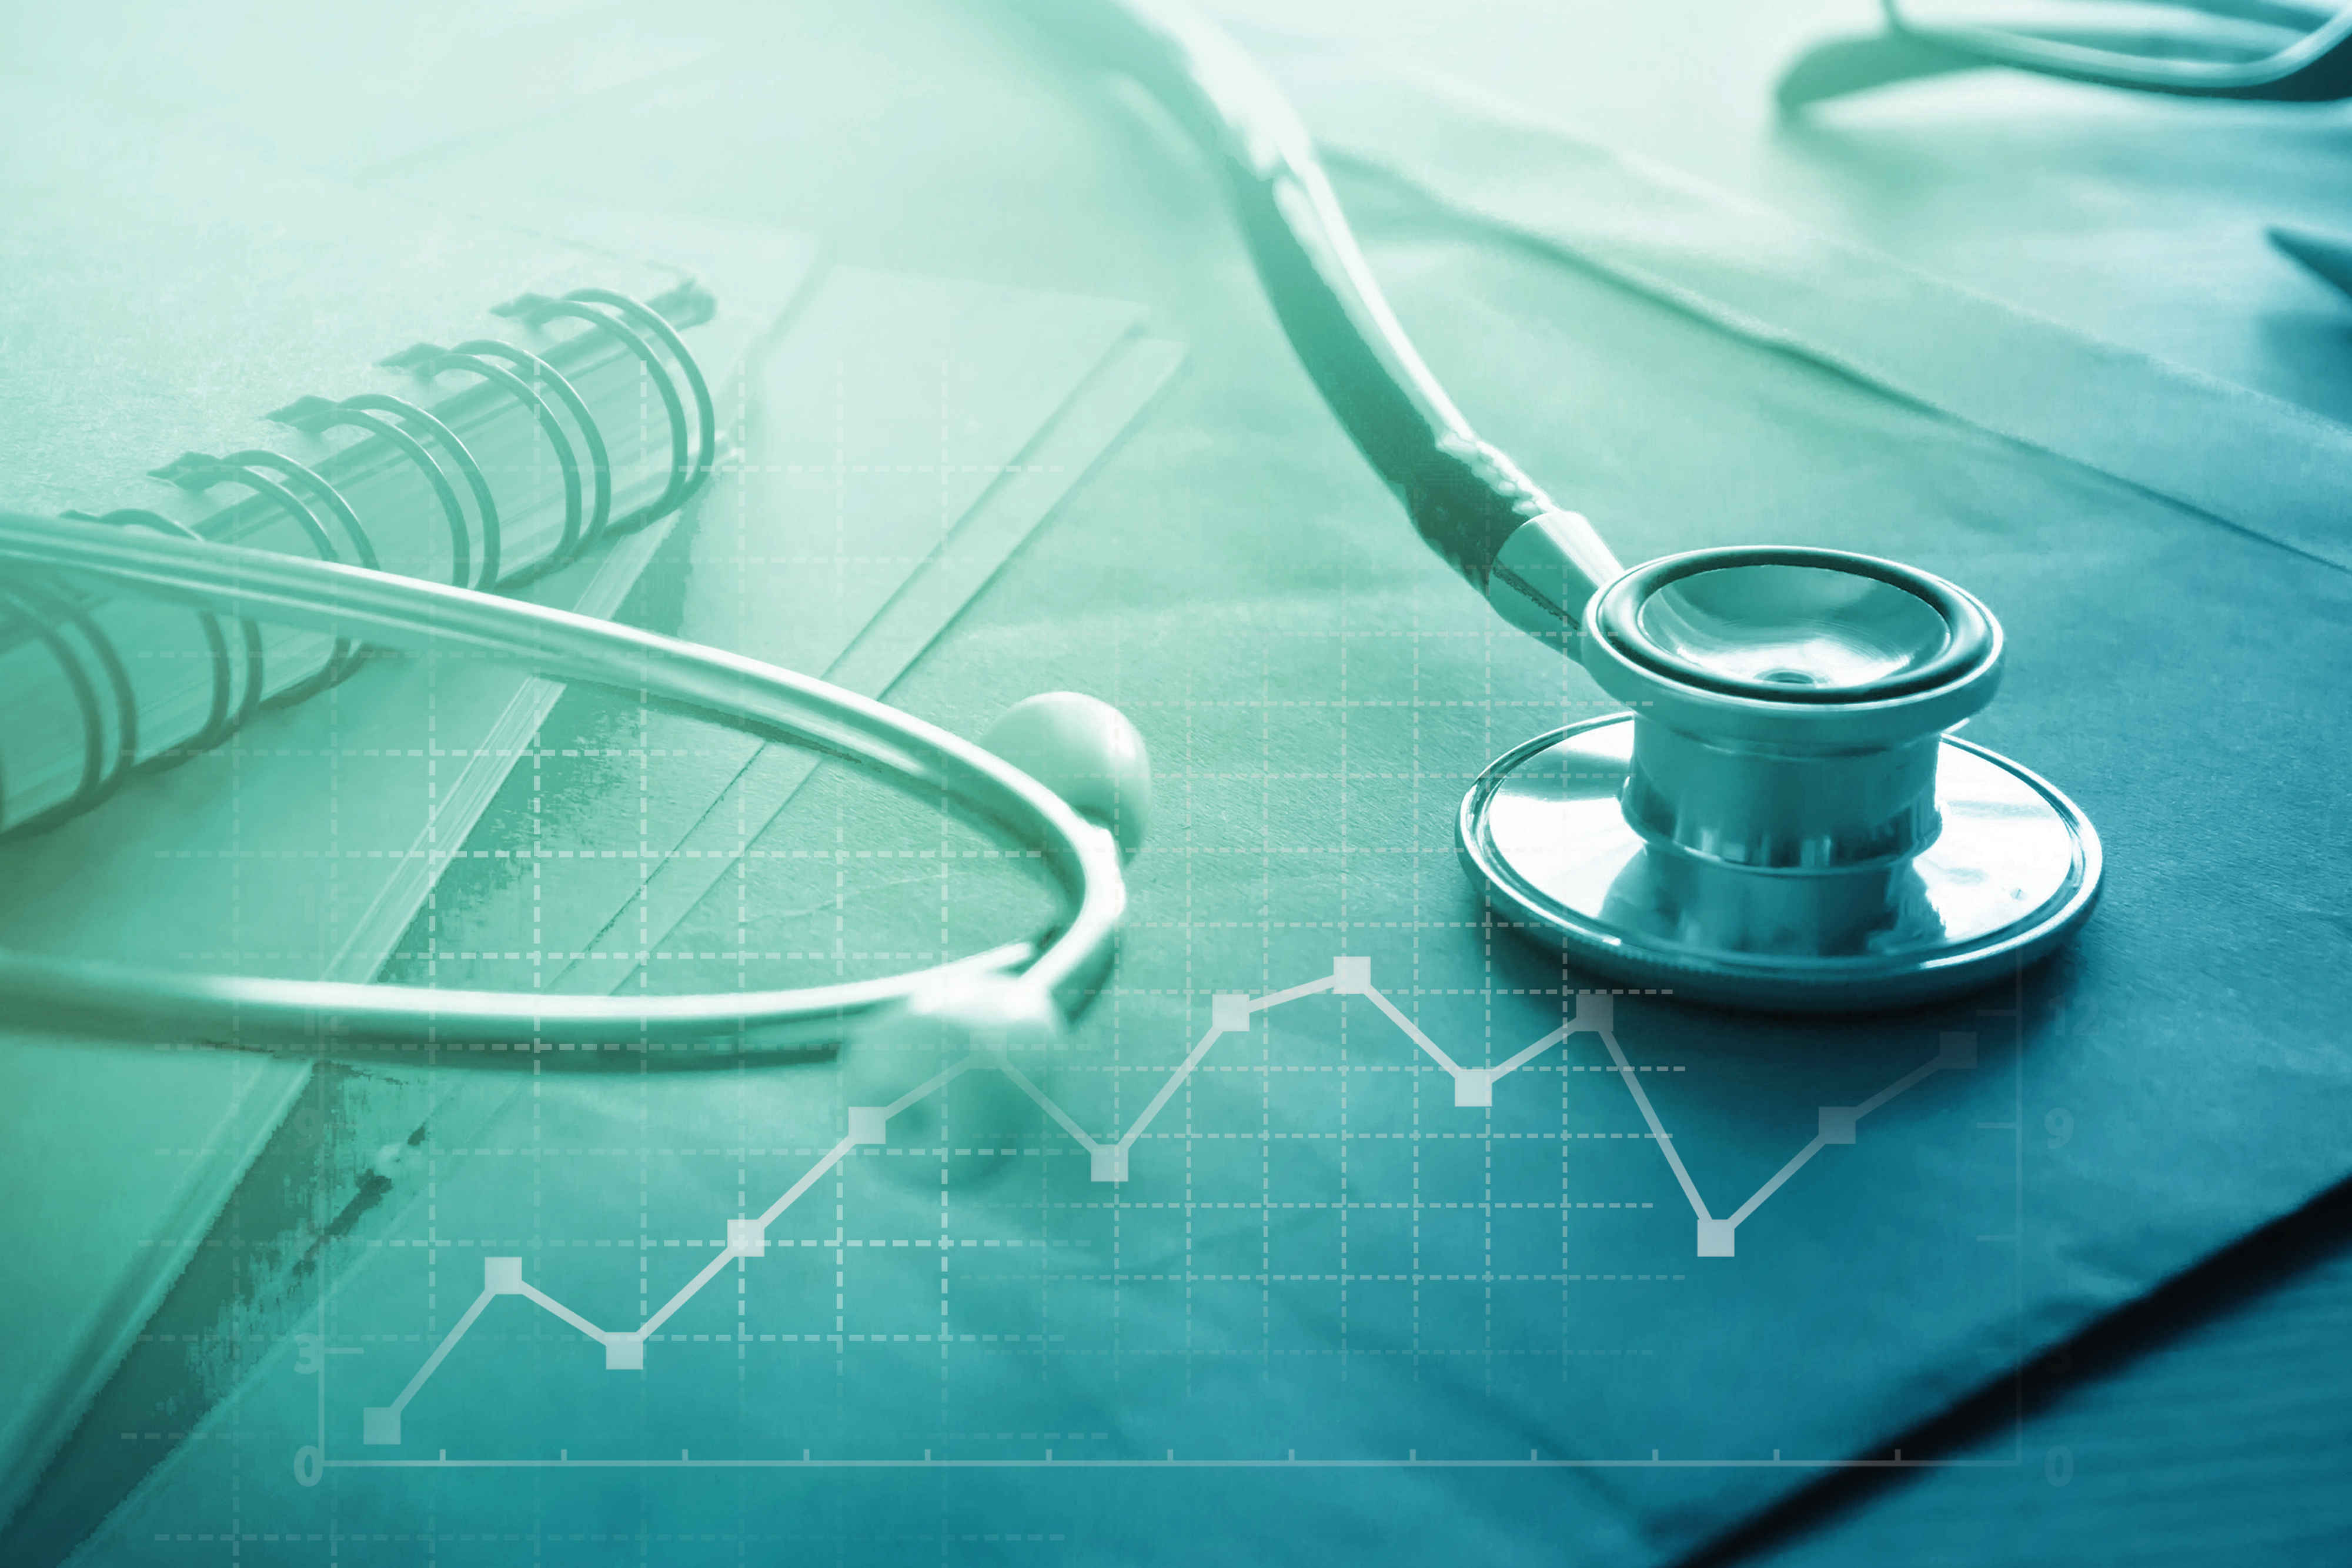 A stethoscope on a file folder with a line graph superimposed over the image.